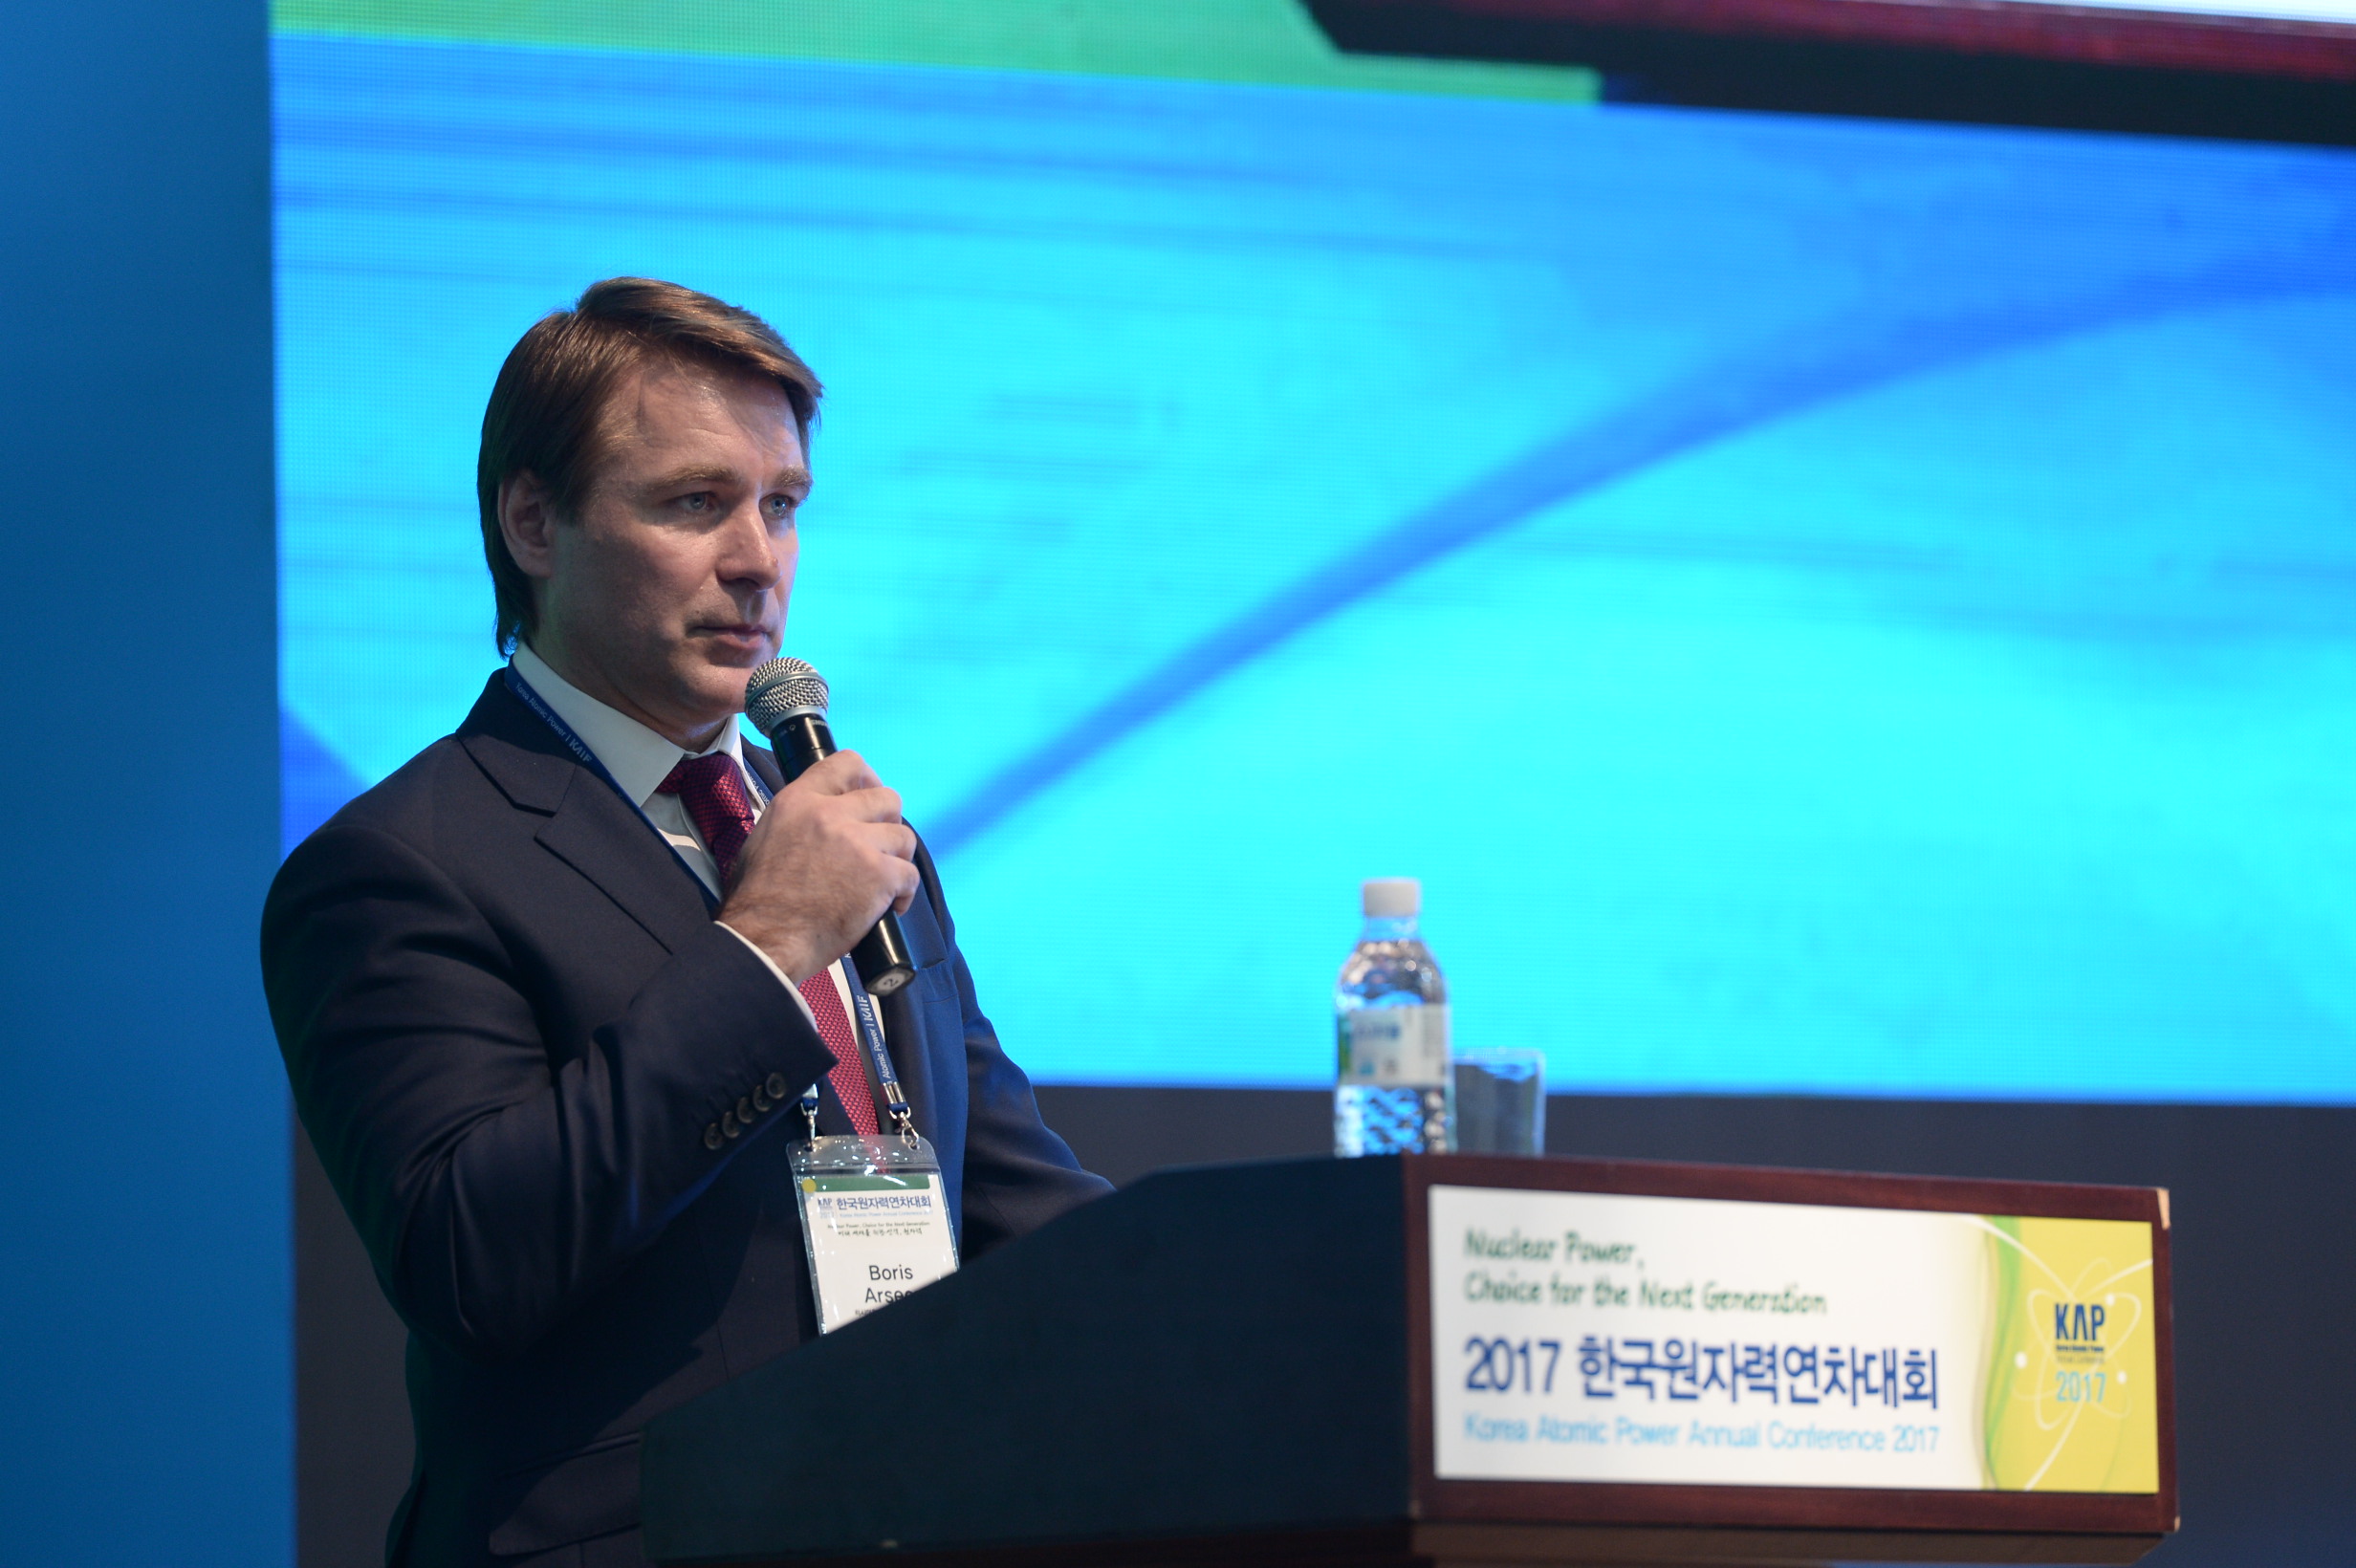 Global Operations and Environmental Policy of ROSATOM Presented  at Korea Atomic Power Annual Conference